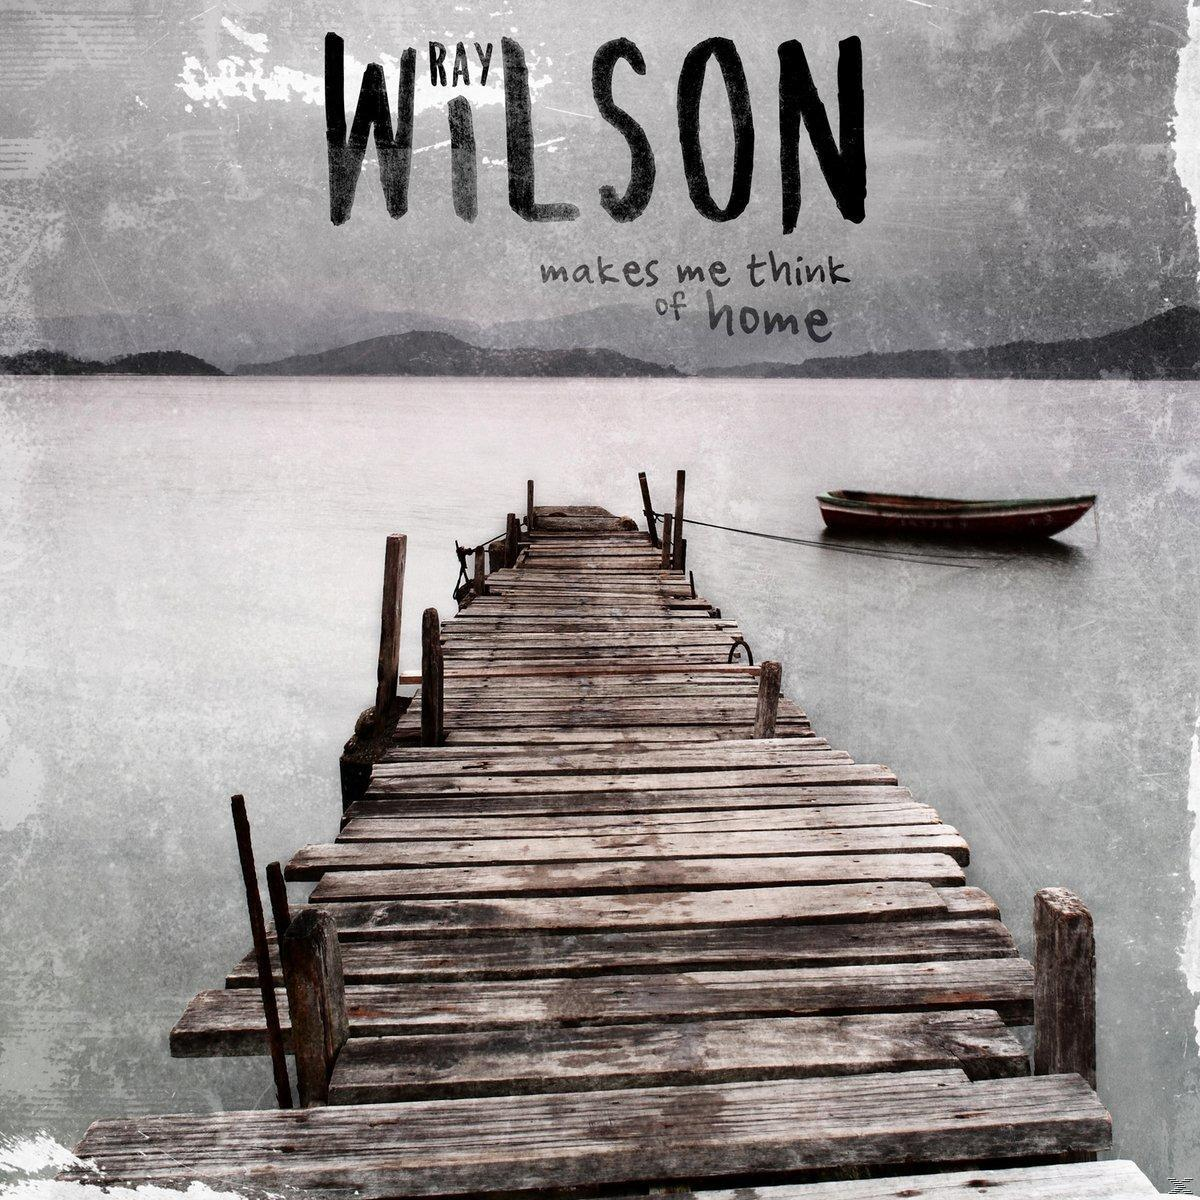 (CD) Think Of - Home Makes - Ray Me Wilson